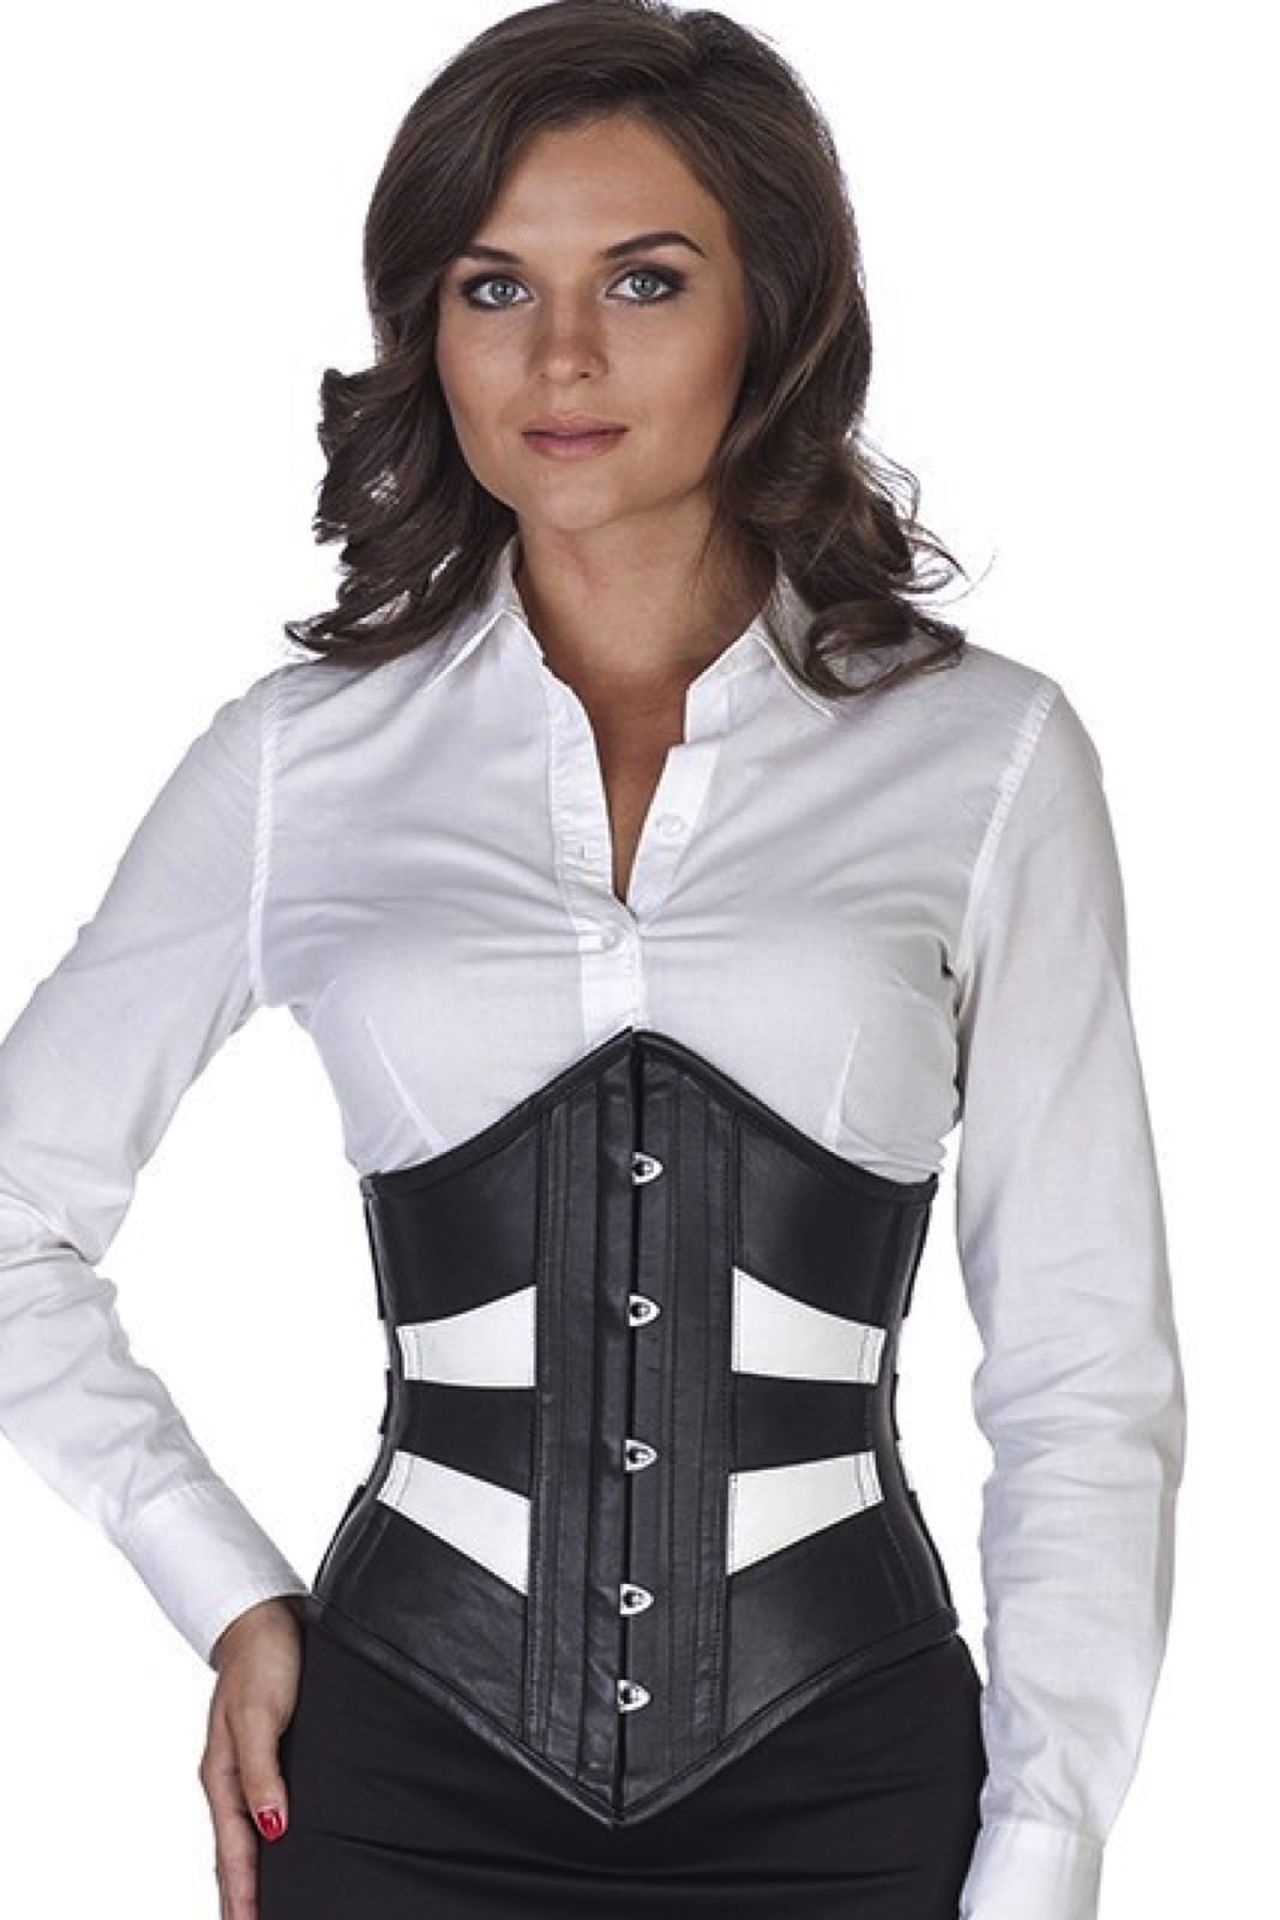 Corset black white leather underbust two color ld35